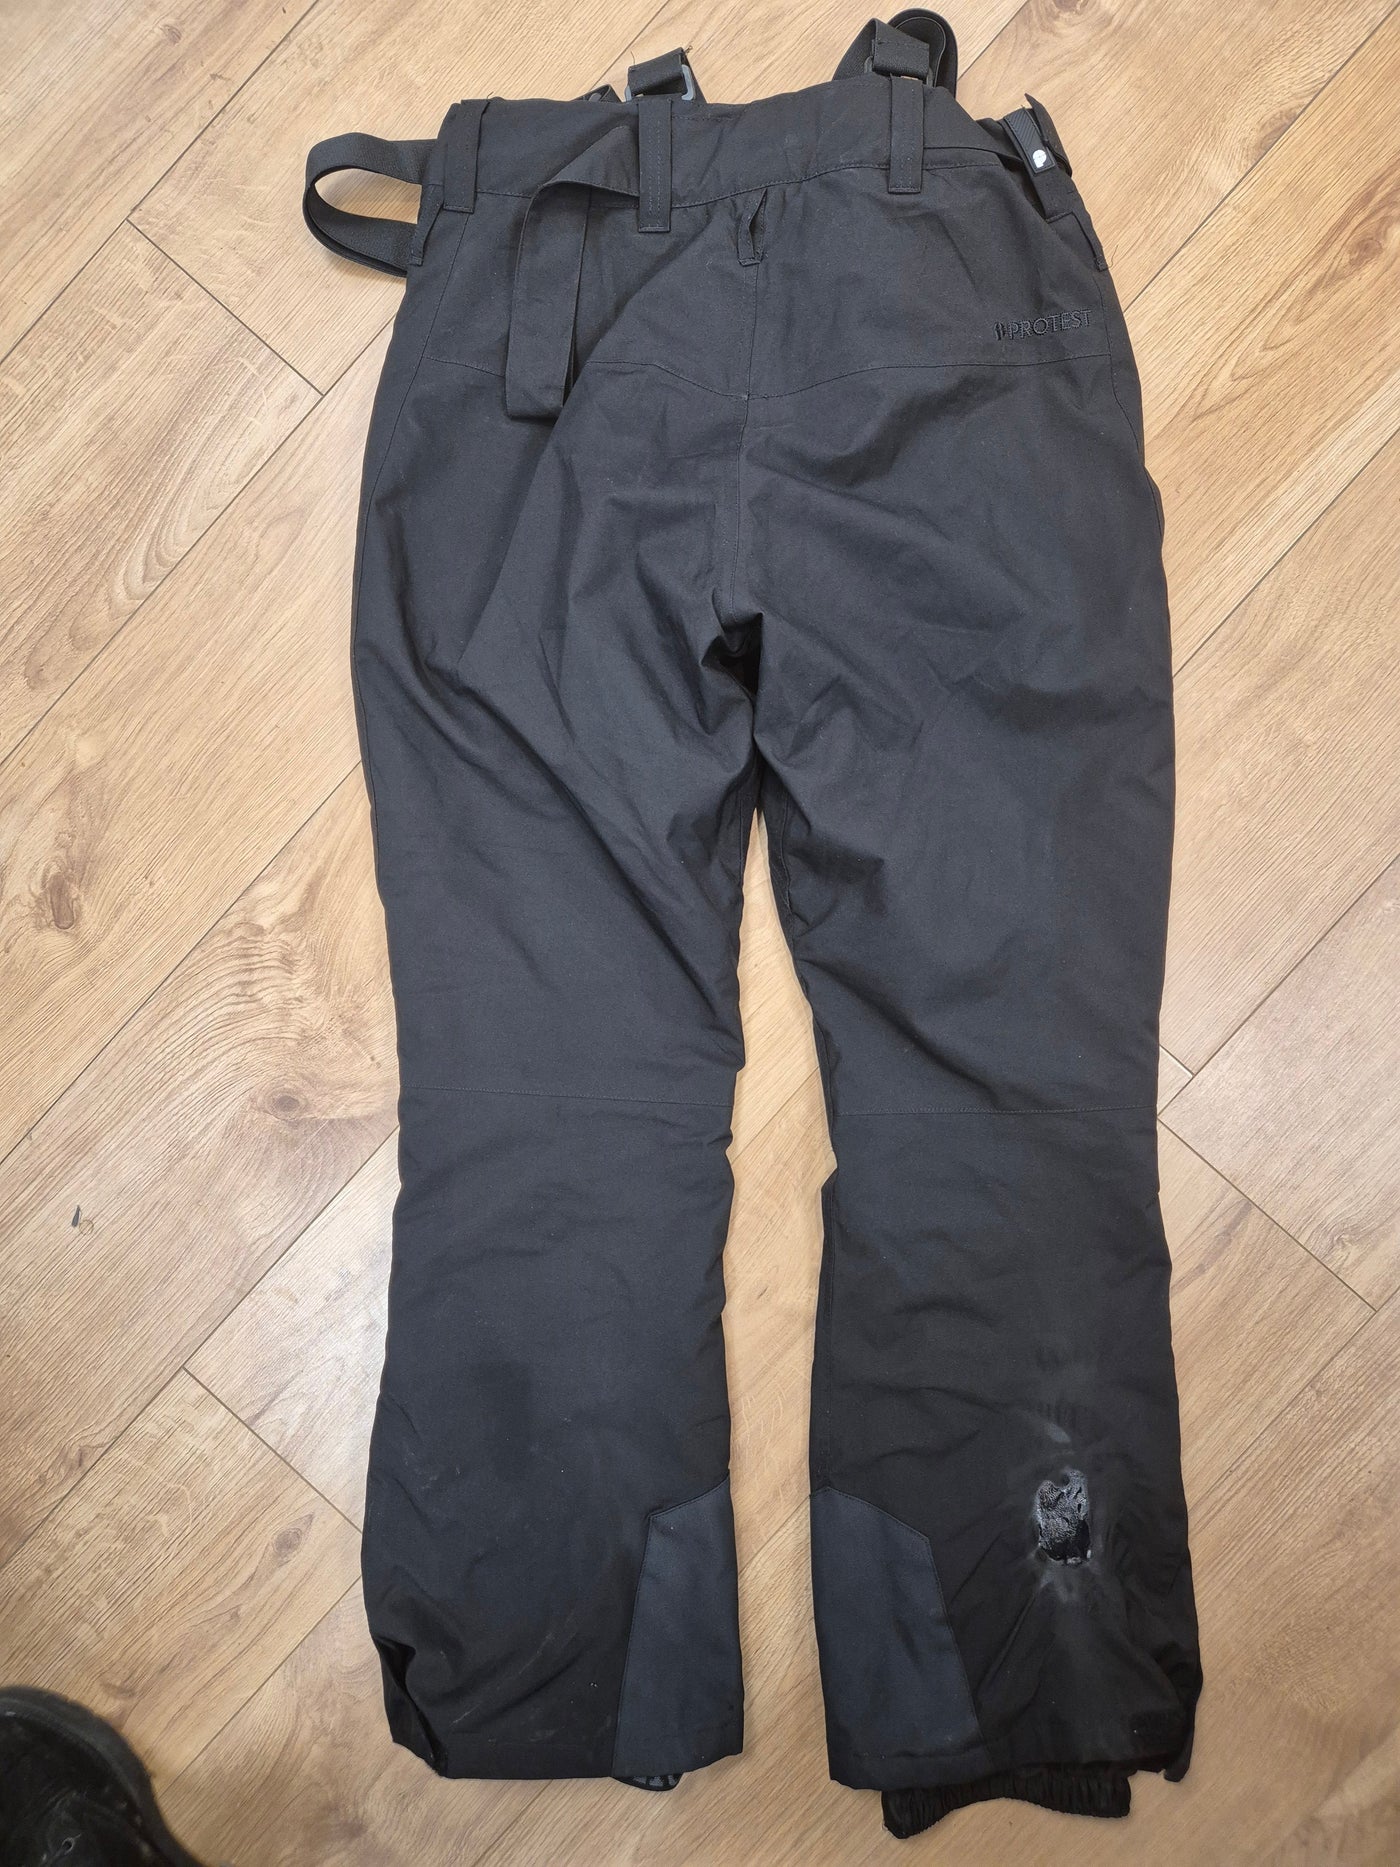 Pre-loved Protest Owens Mens Snow Trousers Large (1008) - Grade C